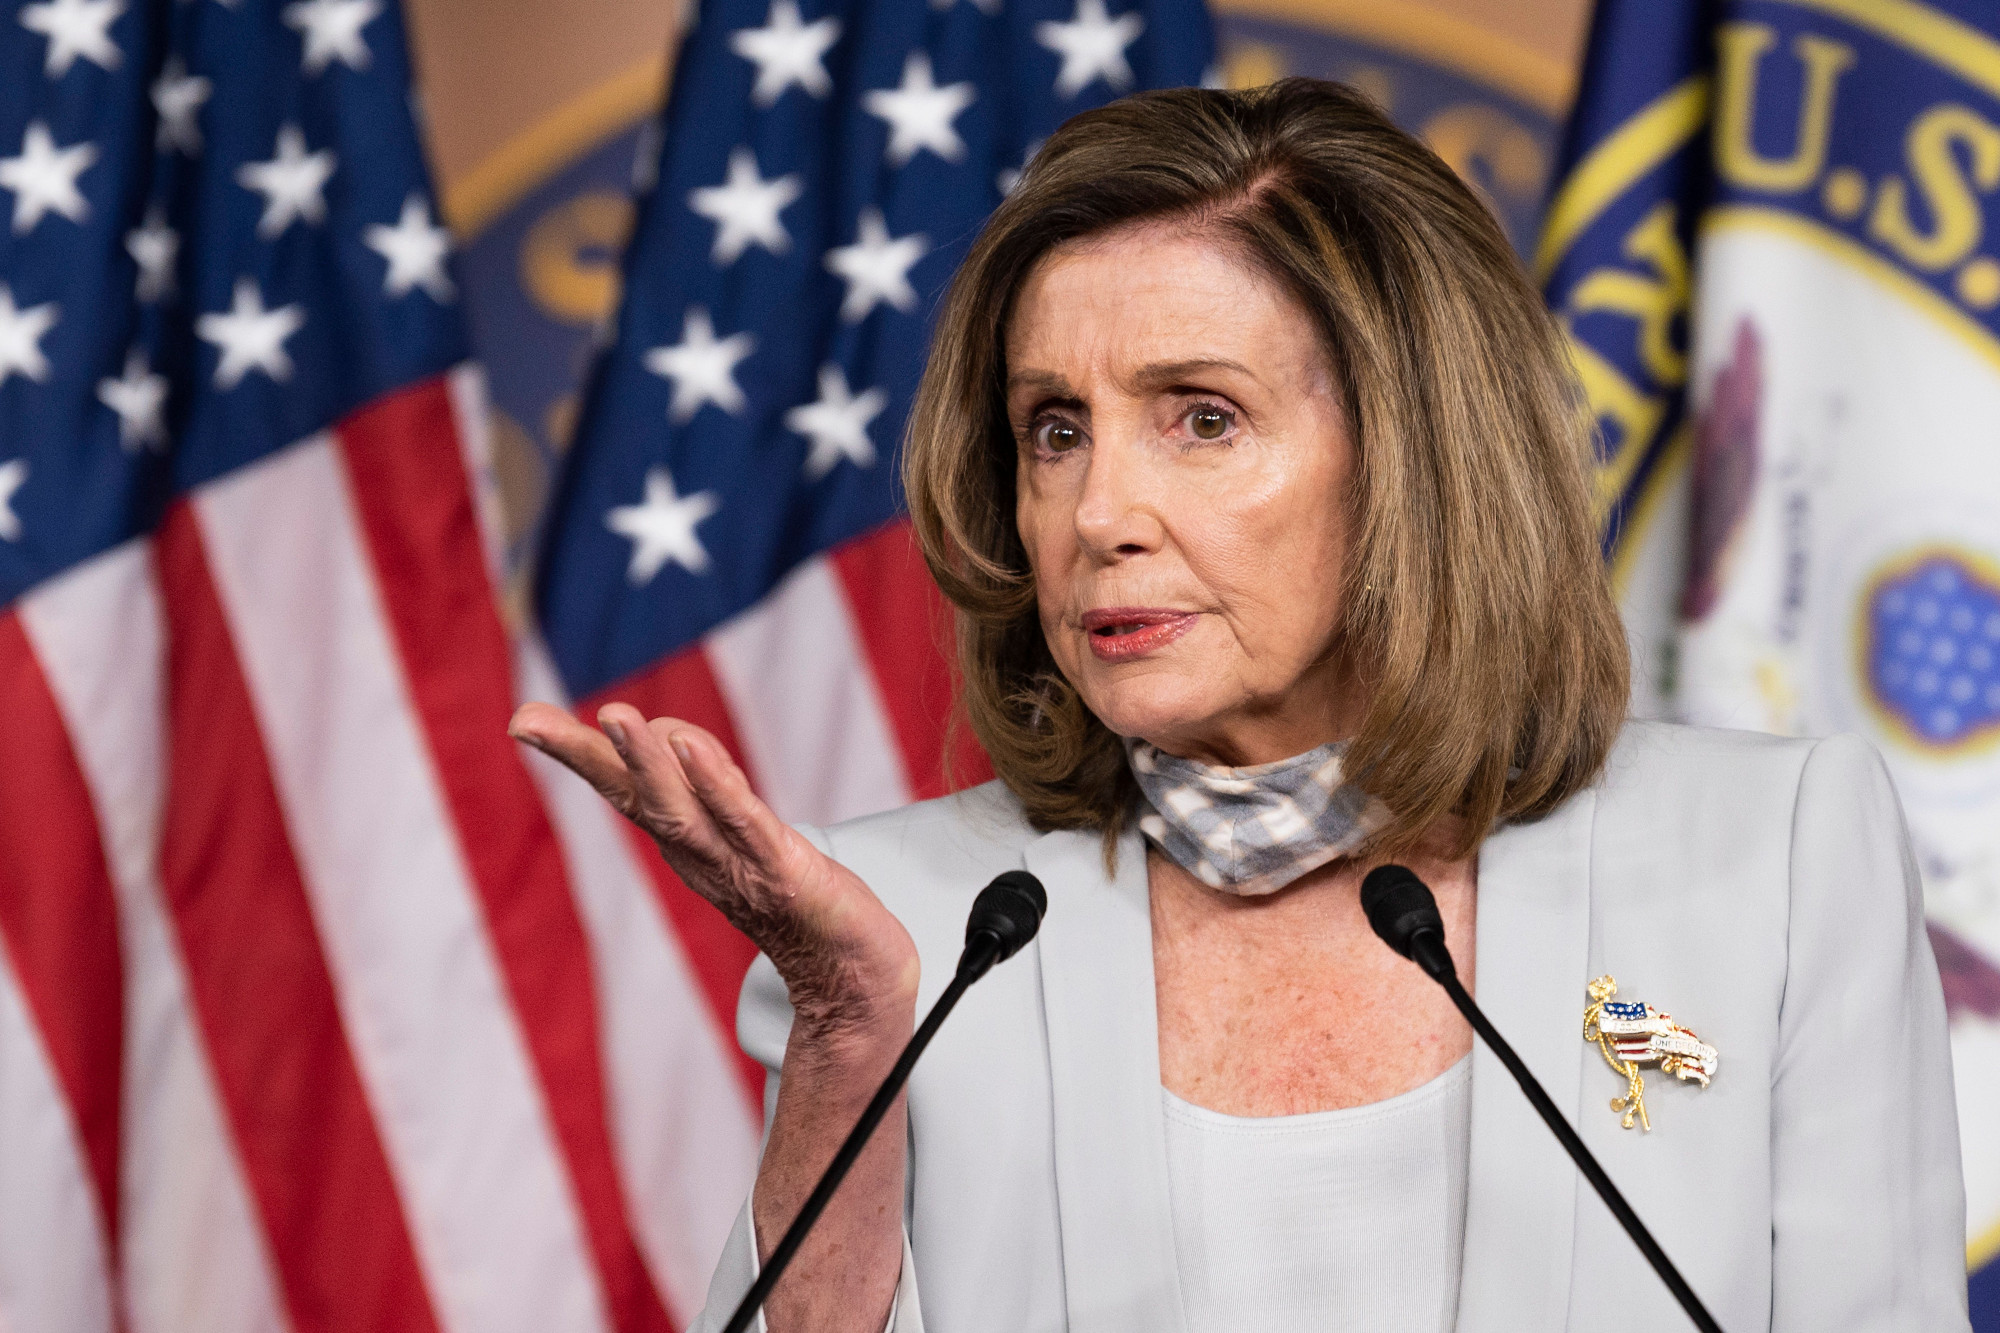 Pelosi Filmed Visiting Hair Salon, Shuttered by COVID-19 Restrictions, for Blow-Out